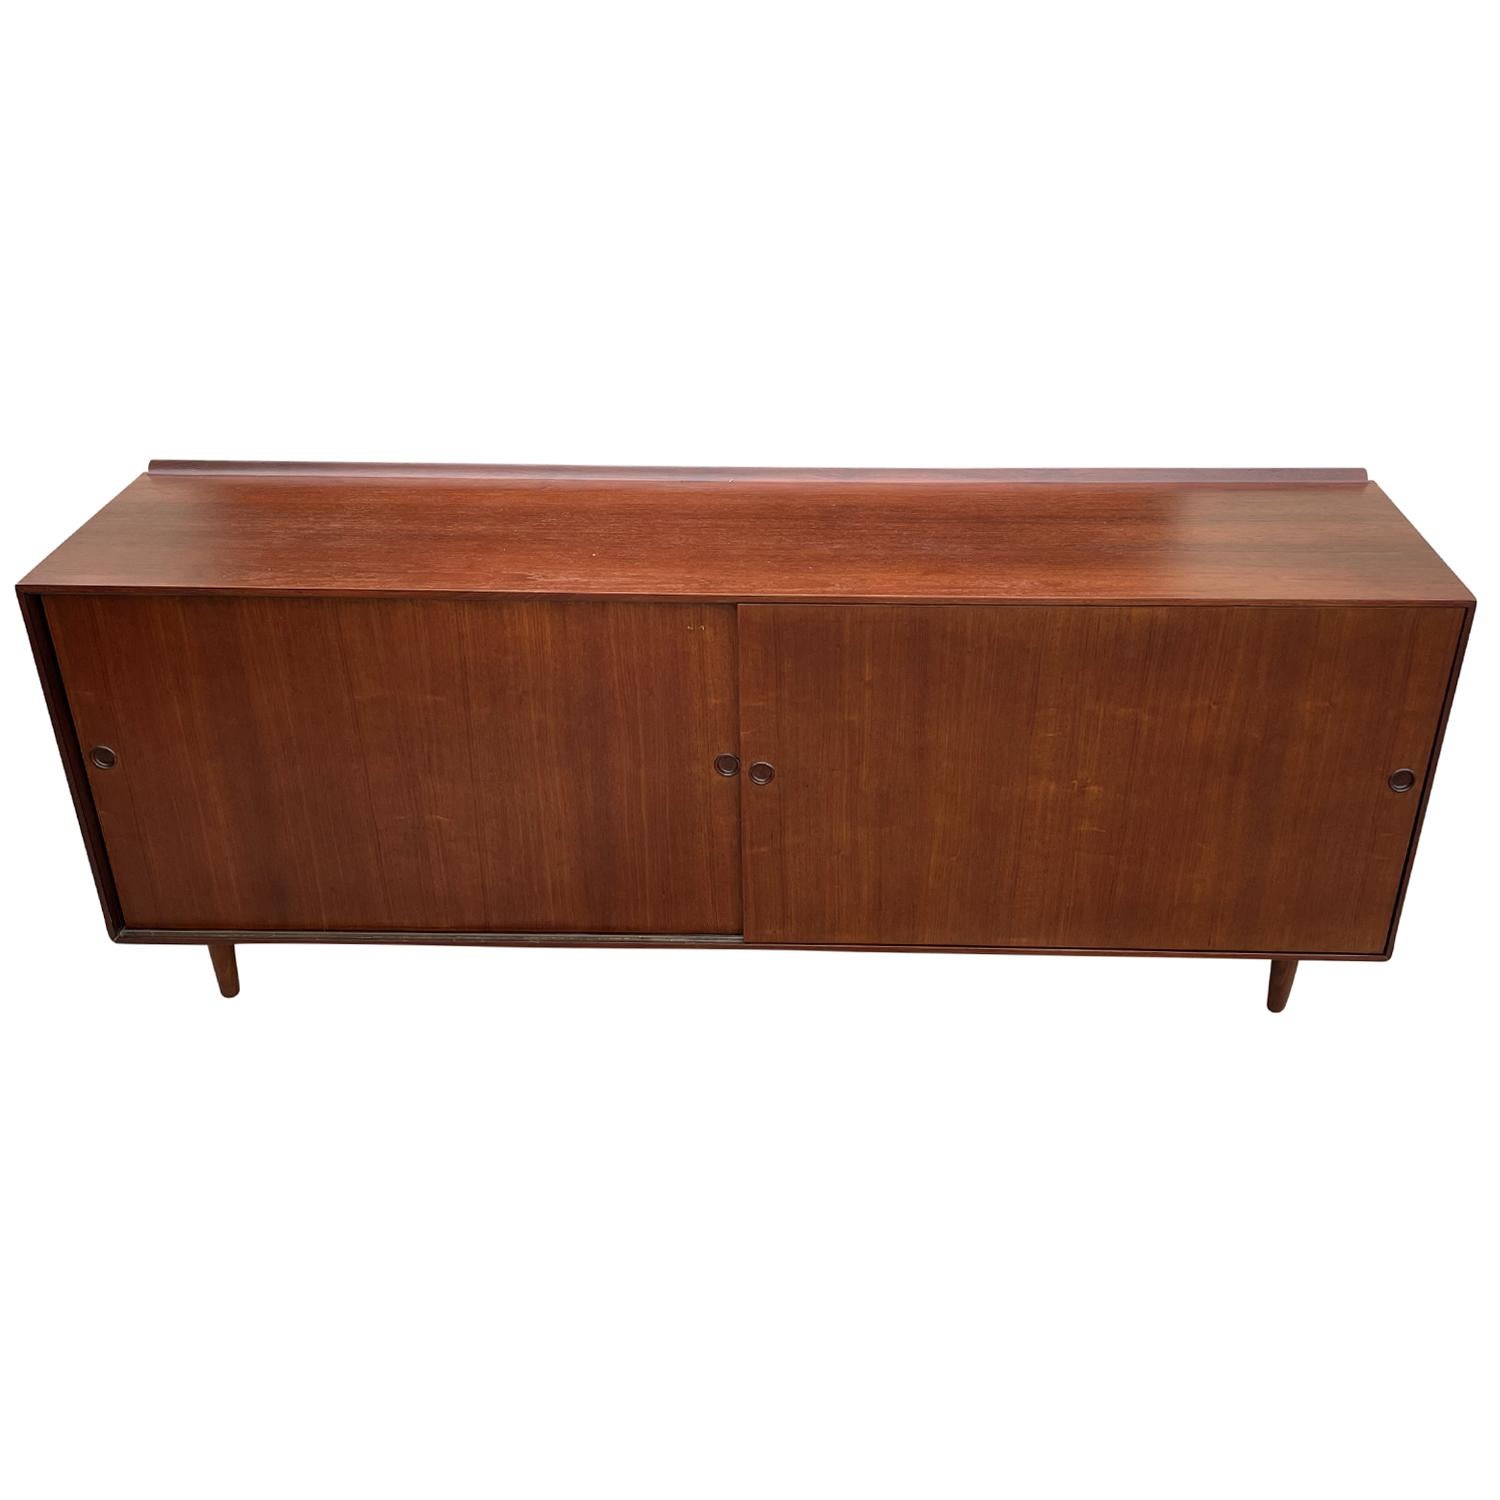 A vintage Mid-Century modern Danish, American cabinet made of hand crafted Walnut, designed by Finn Juhl and produced by Baker in good condition. The Scandinavian sideboard is composed with two sliding doors, standing on six small wooden feet. The